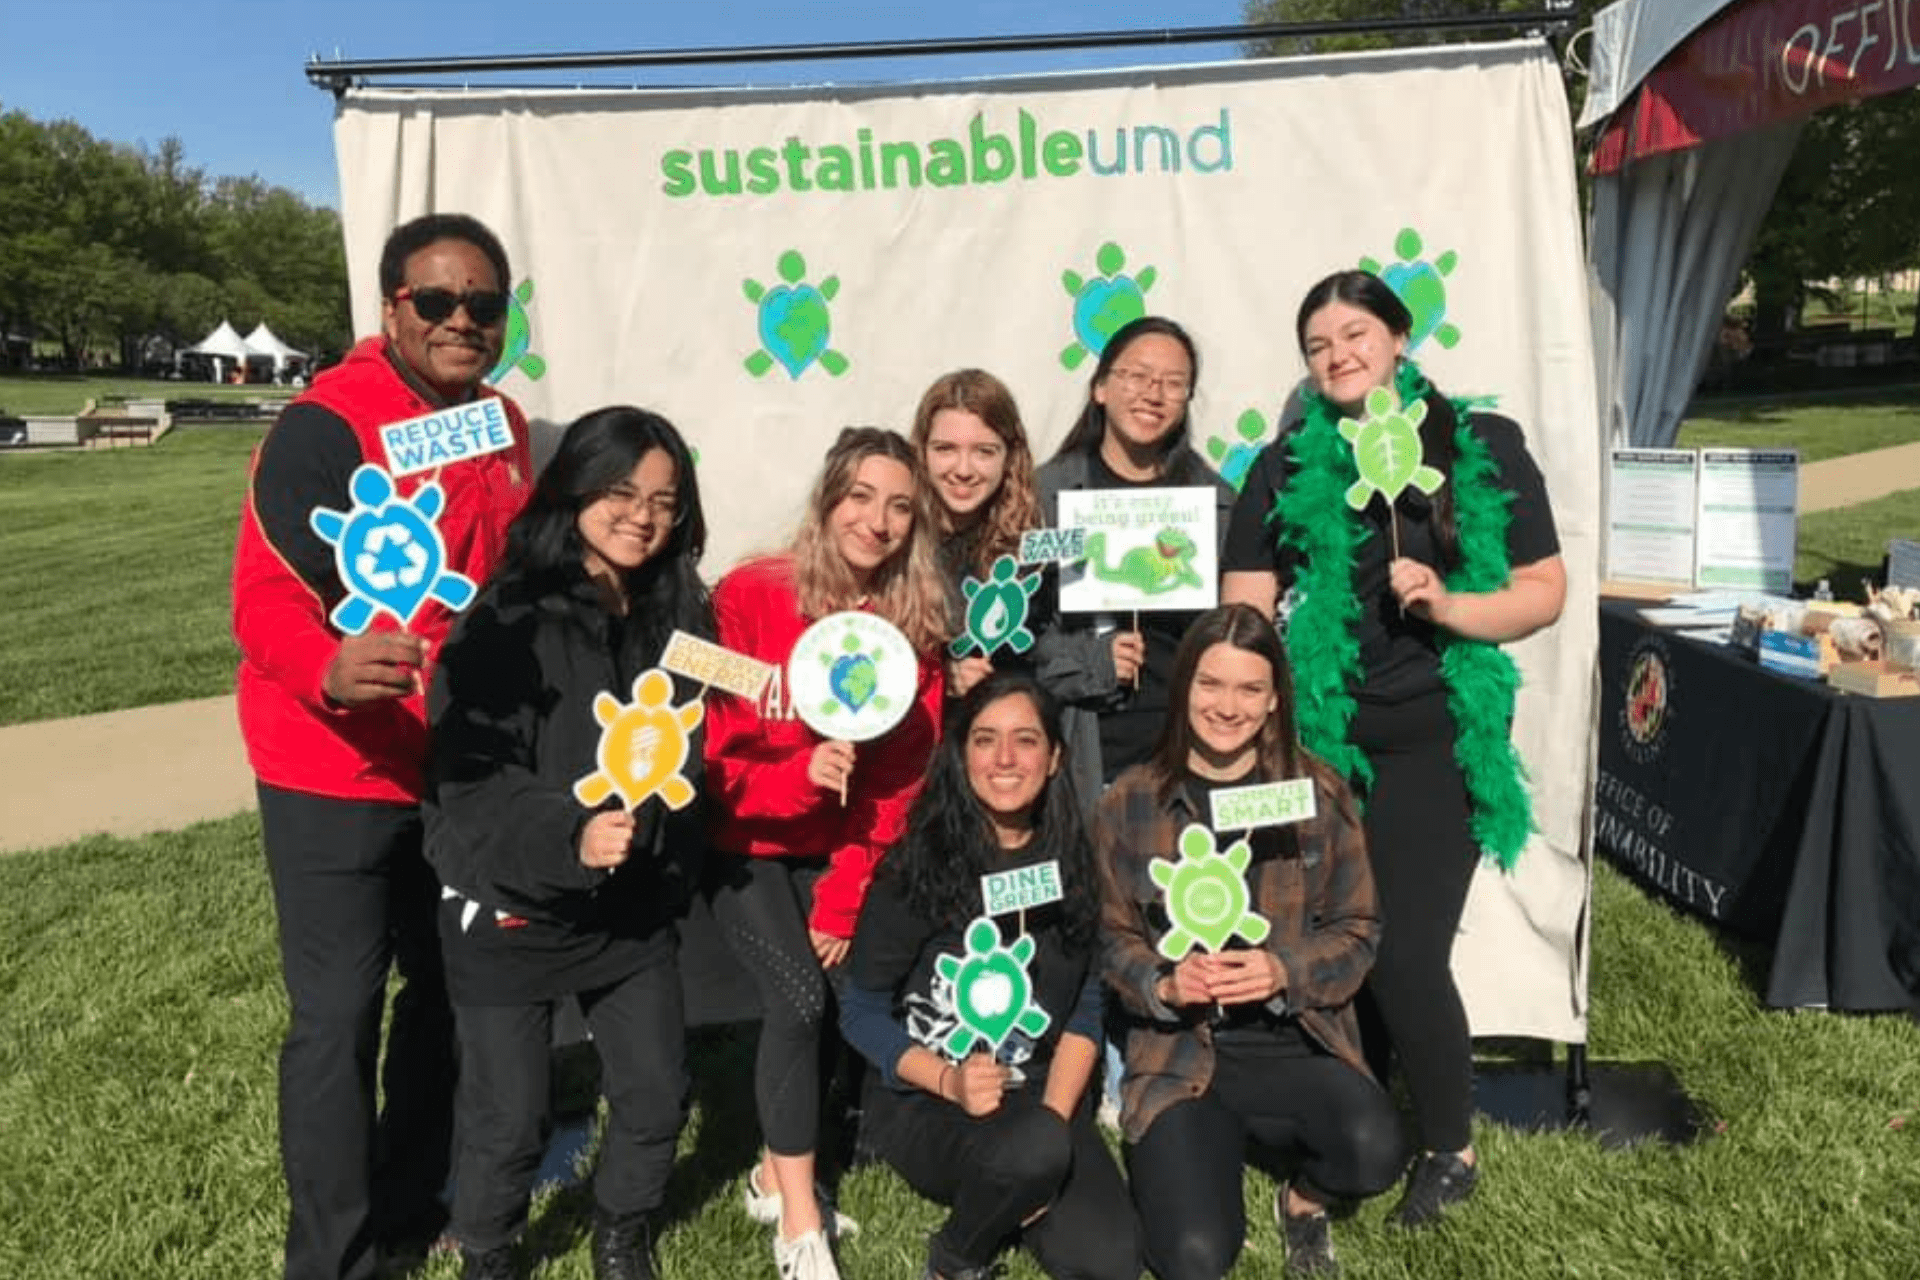 President Pines, staff, and students at sustainability photo booth